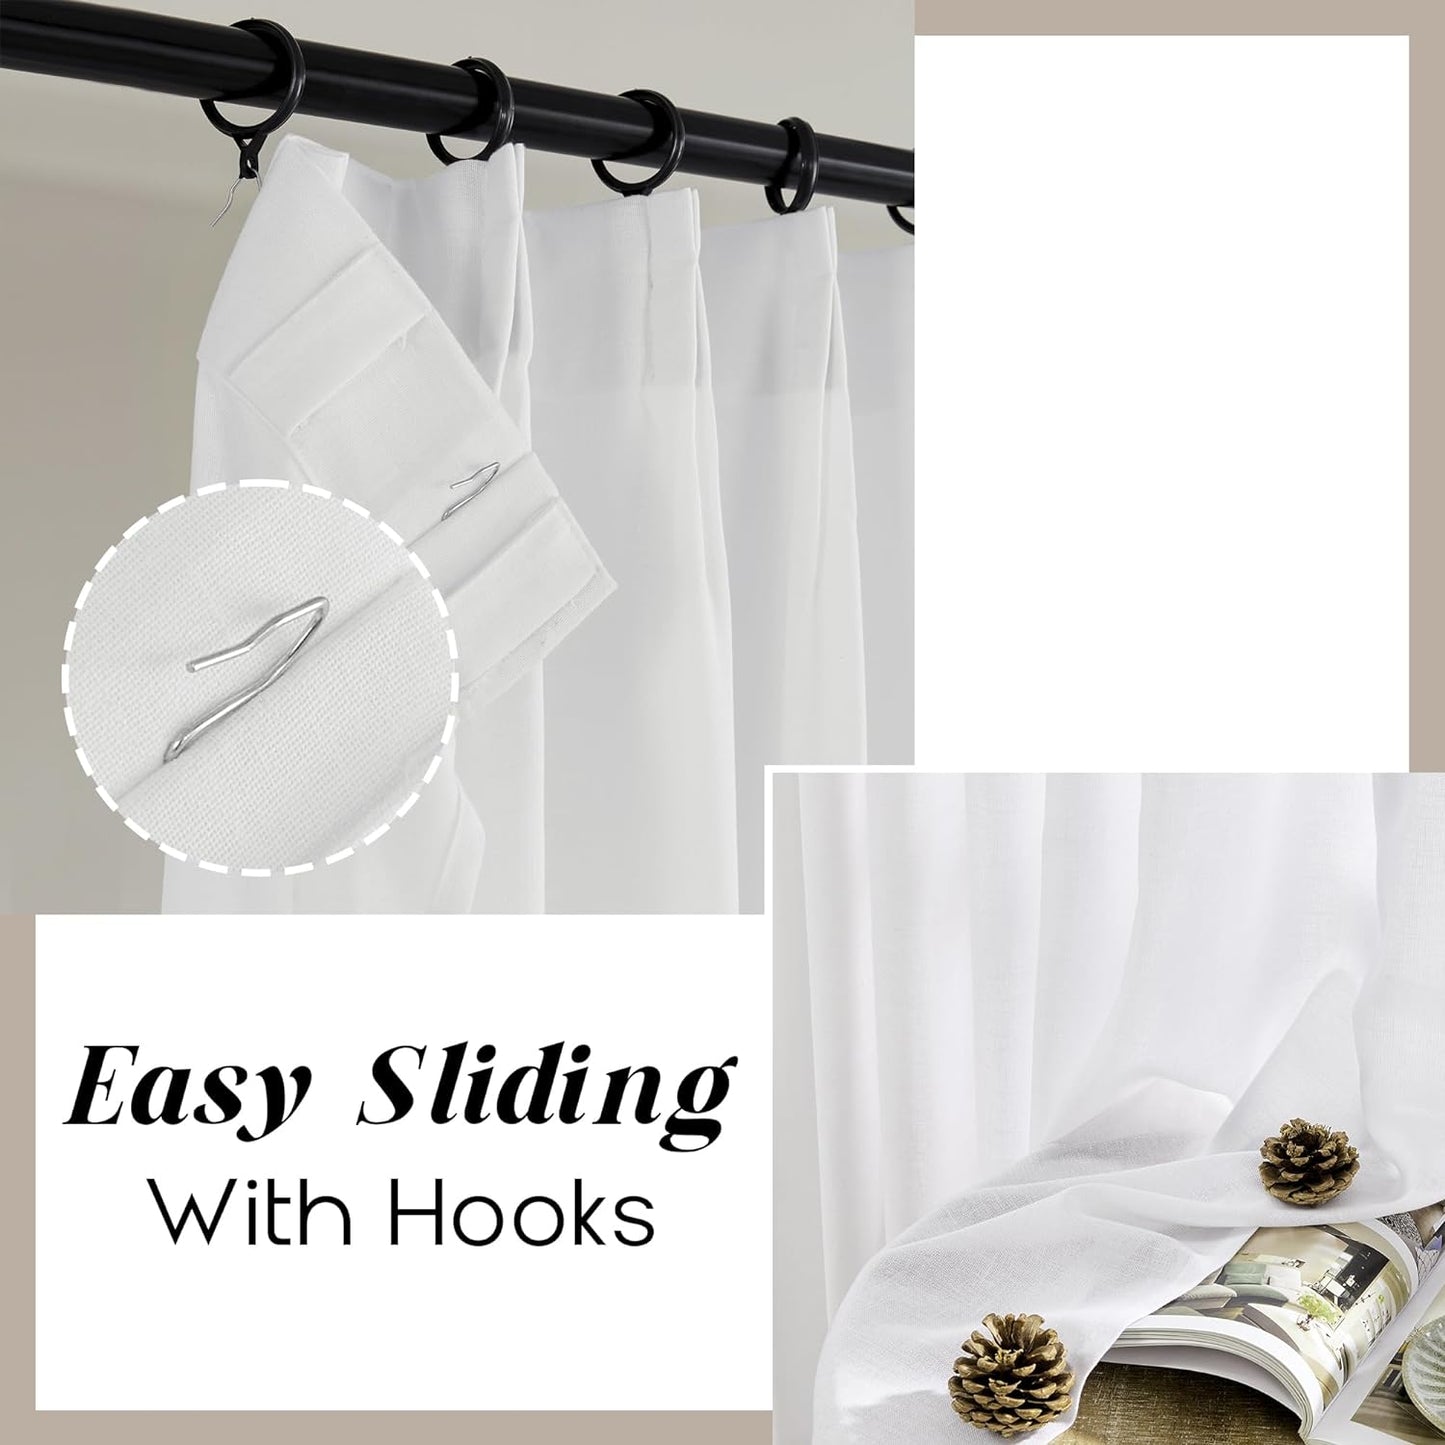 SHINELAND White Linen Curtains 84 Inches Long for Bedroom 2 Panels Set,Sheer Boho Pinch Pleated with Hooks Back Tab Window Sheers Draperies 84 Length for Dining Room Living Room Office at Home  SHINELAND   